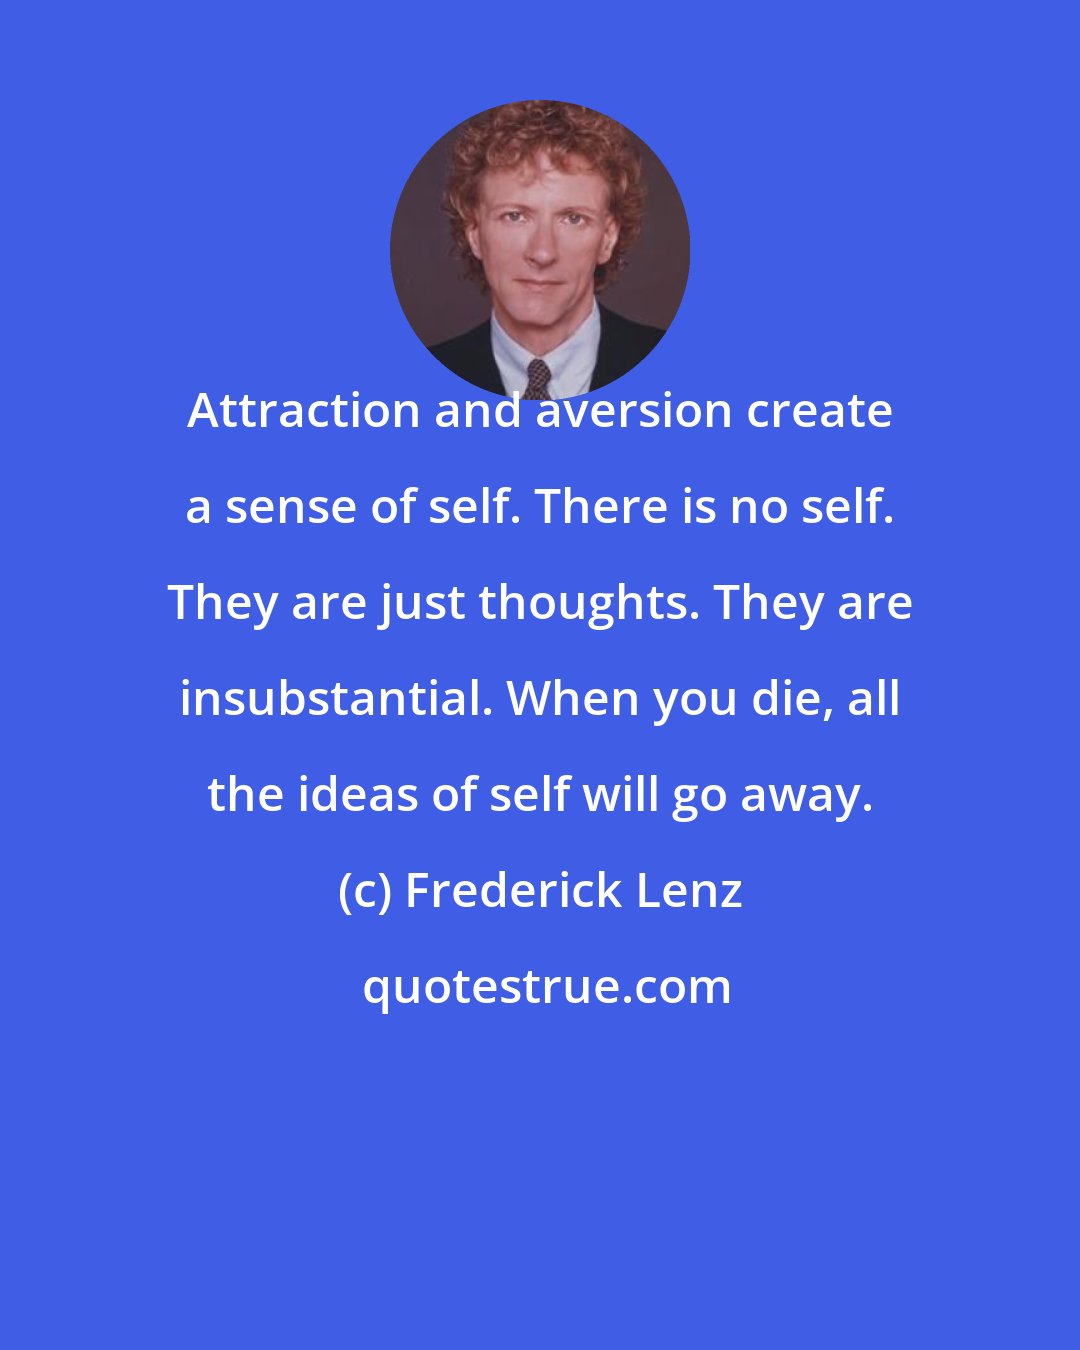 Frederick Lenz: Attraction and aversion create a sense of self. There is no self. They are just thoughts. They are insubstantial. When you die, all the ideas of self will go away.